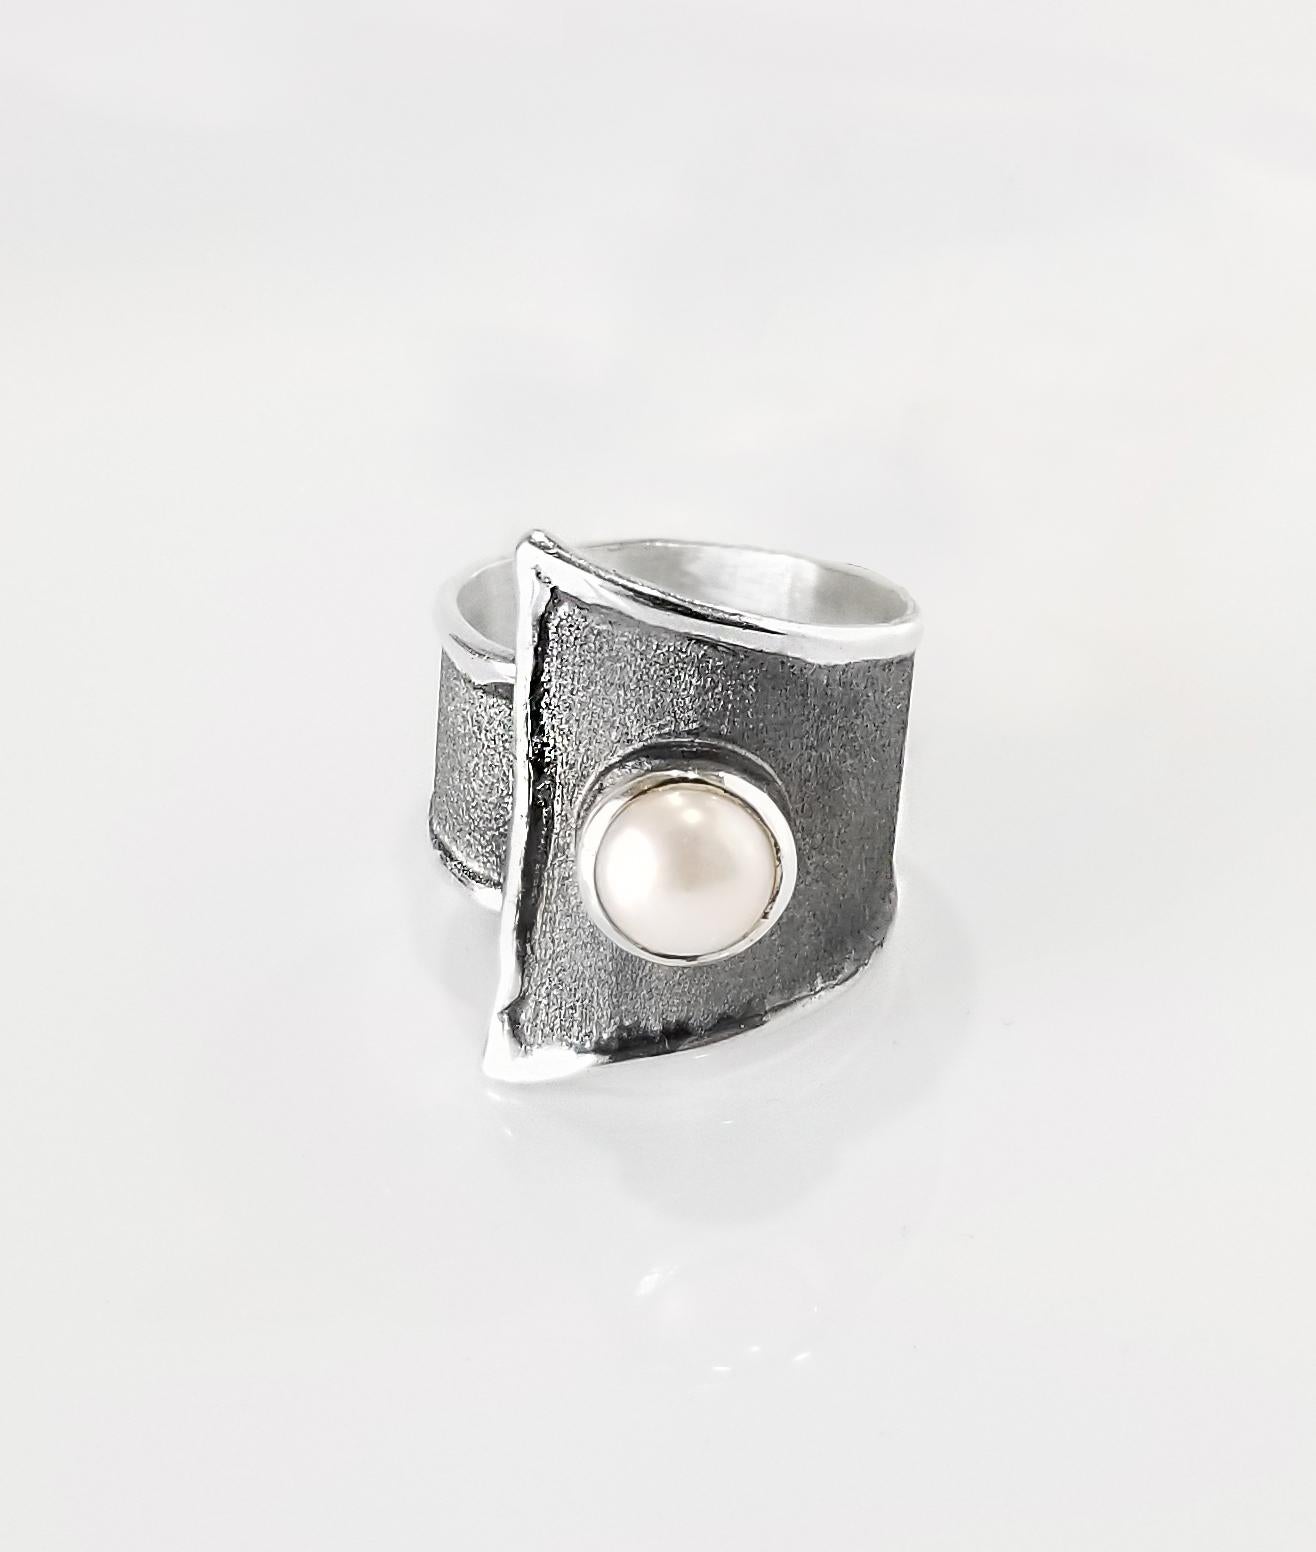 Yianni Creations Hephestos Collection 100% Handmade Artisan Ring from Fine Silver. The ring features a 7 - 7.5 mm Freshwater Pearl contrasting on unique oxidized Rhodium background complemented by unique techniques of craftsmanship - brushed texture